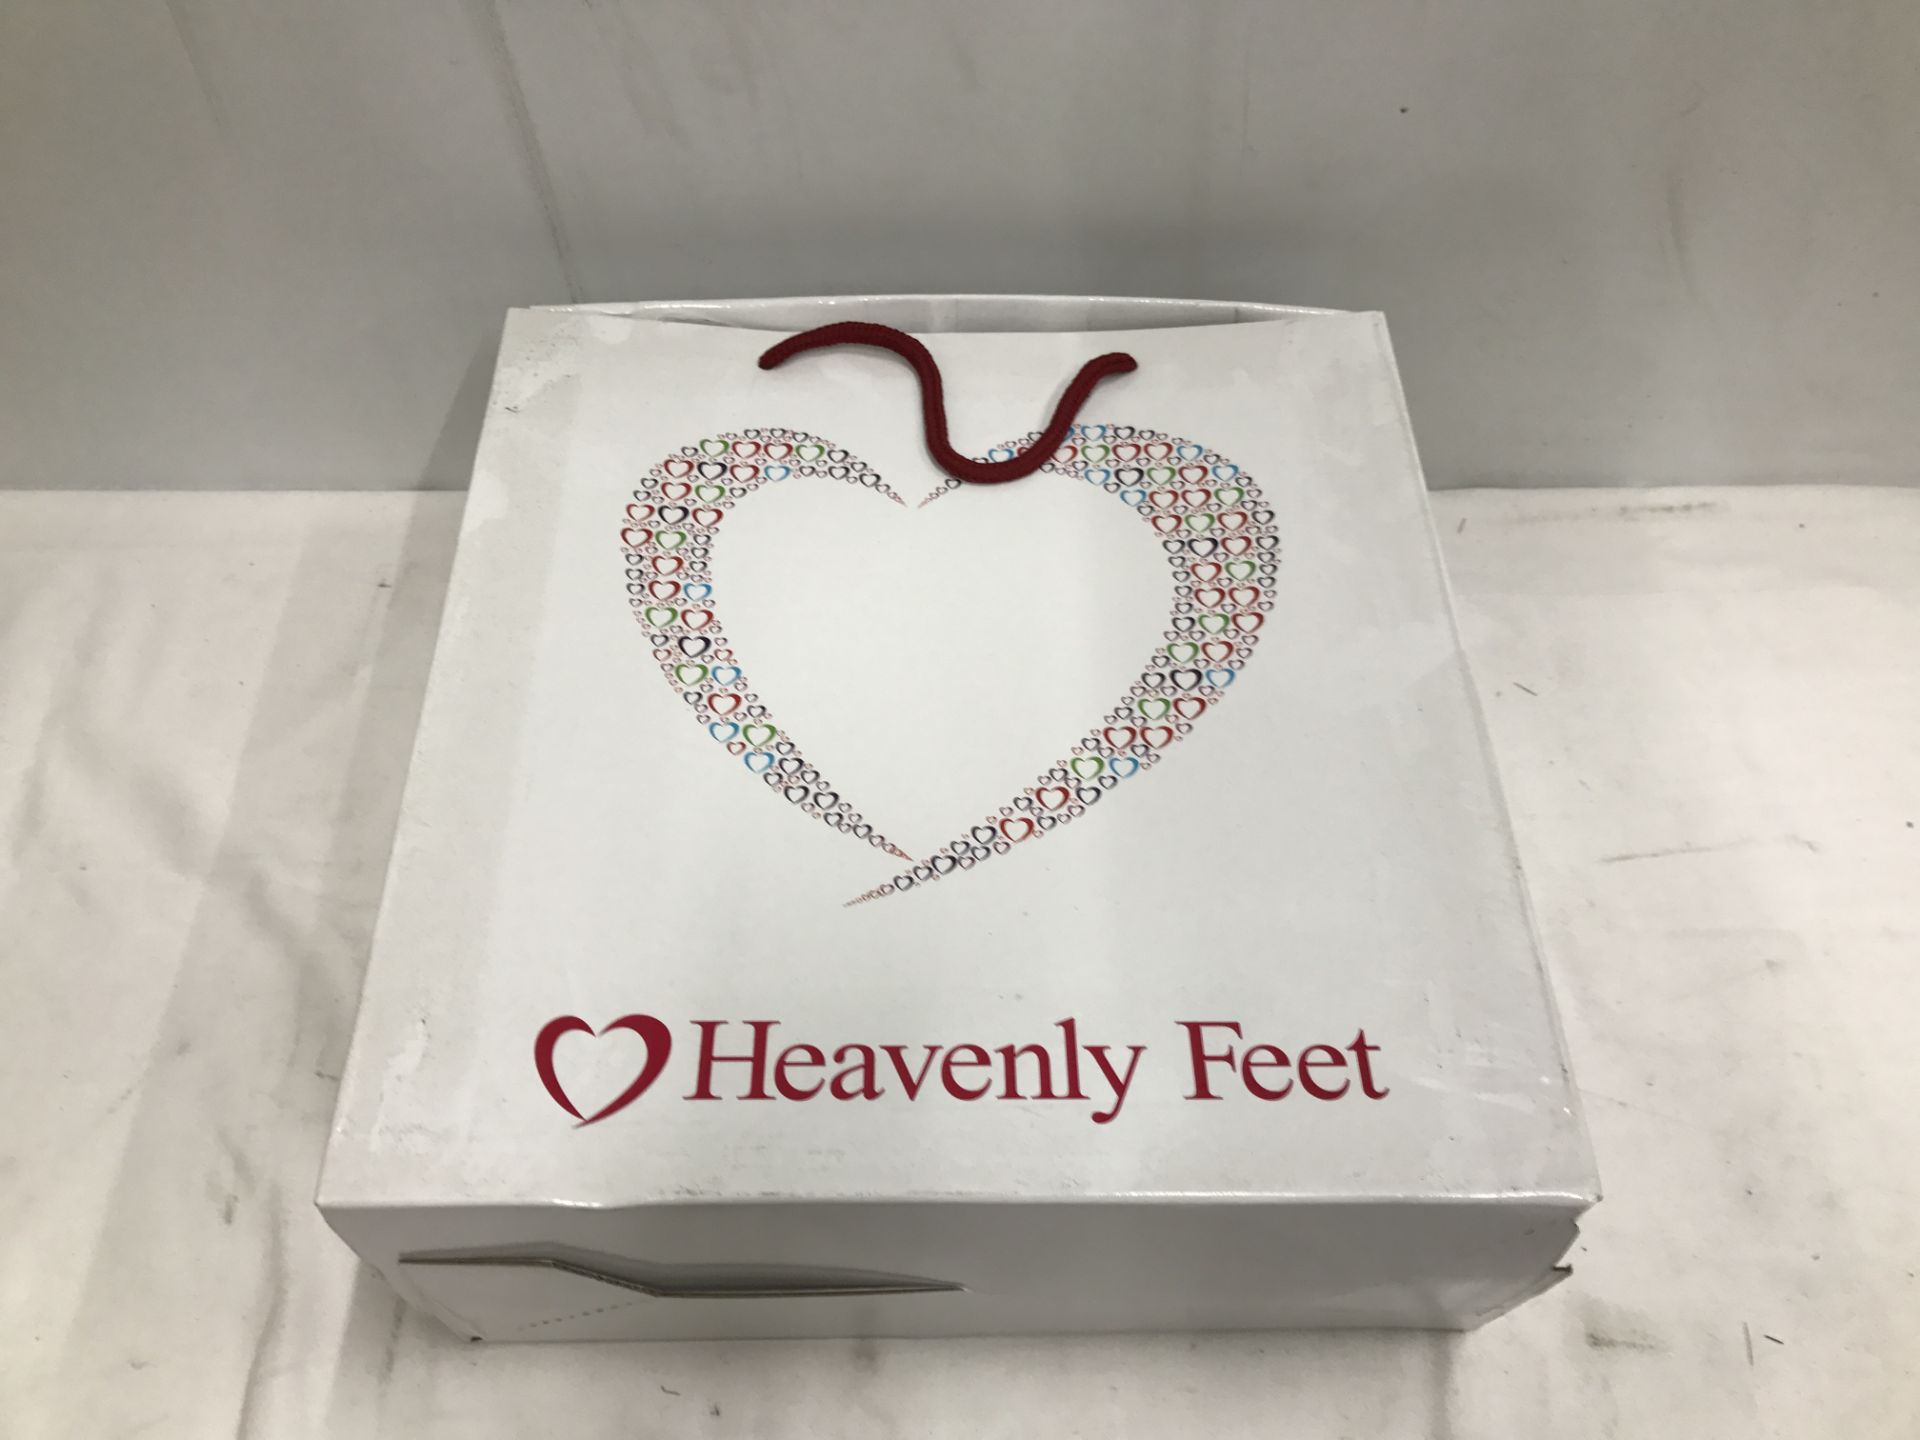 9 x Pairs of Heavenly Feet Ladies Shoes - Image 3 of 4